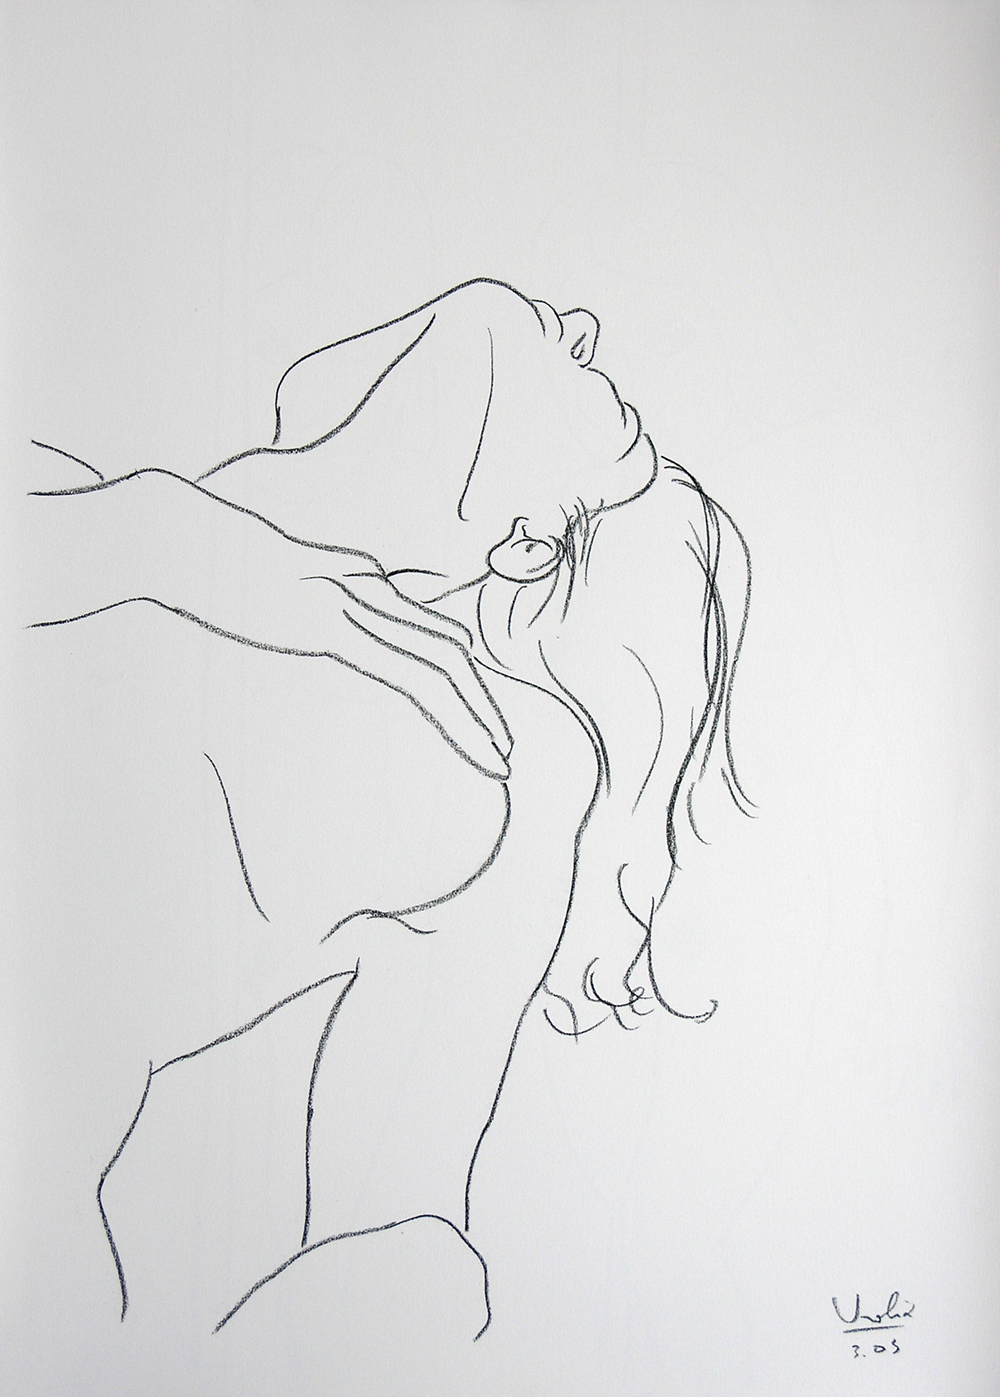 Line, a drawing series by Guido Vrolix